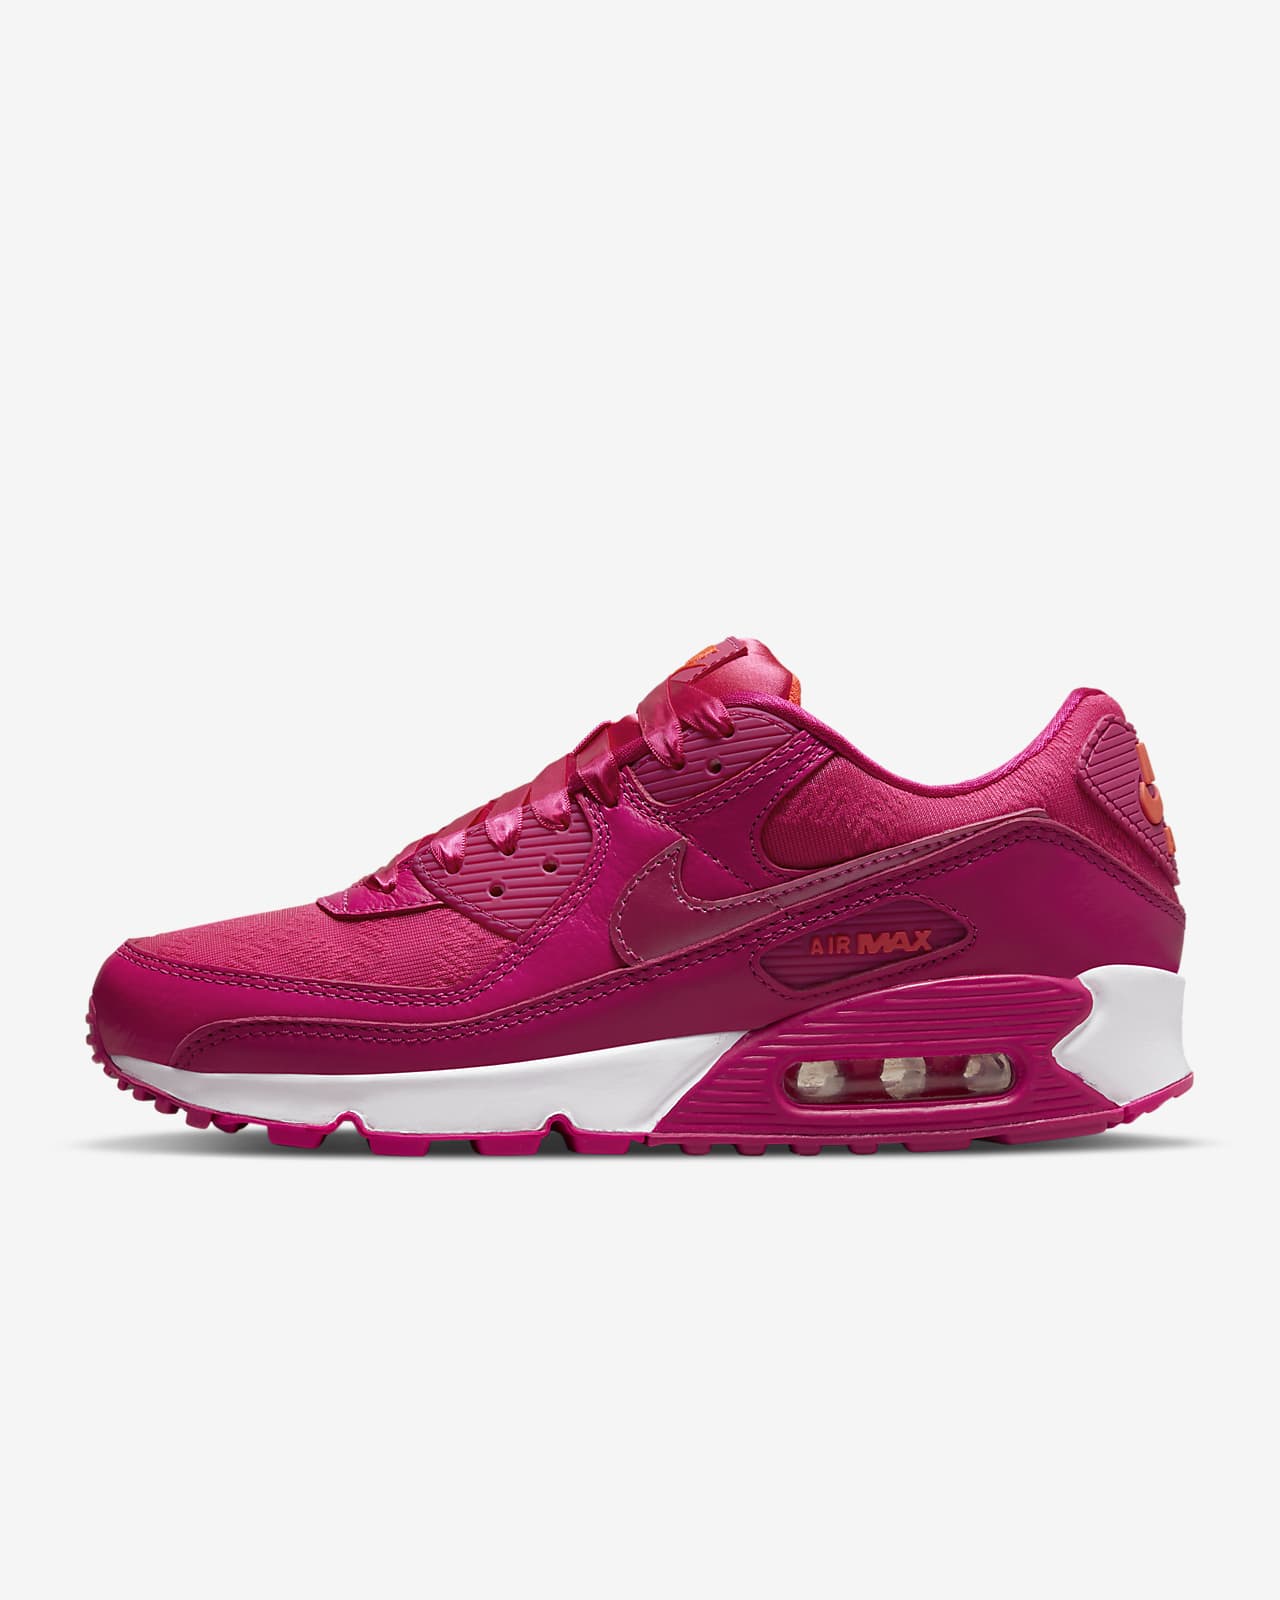 Exclusion Portrayal access Nike Air Max 90 Women's Shoes. Nike.com